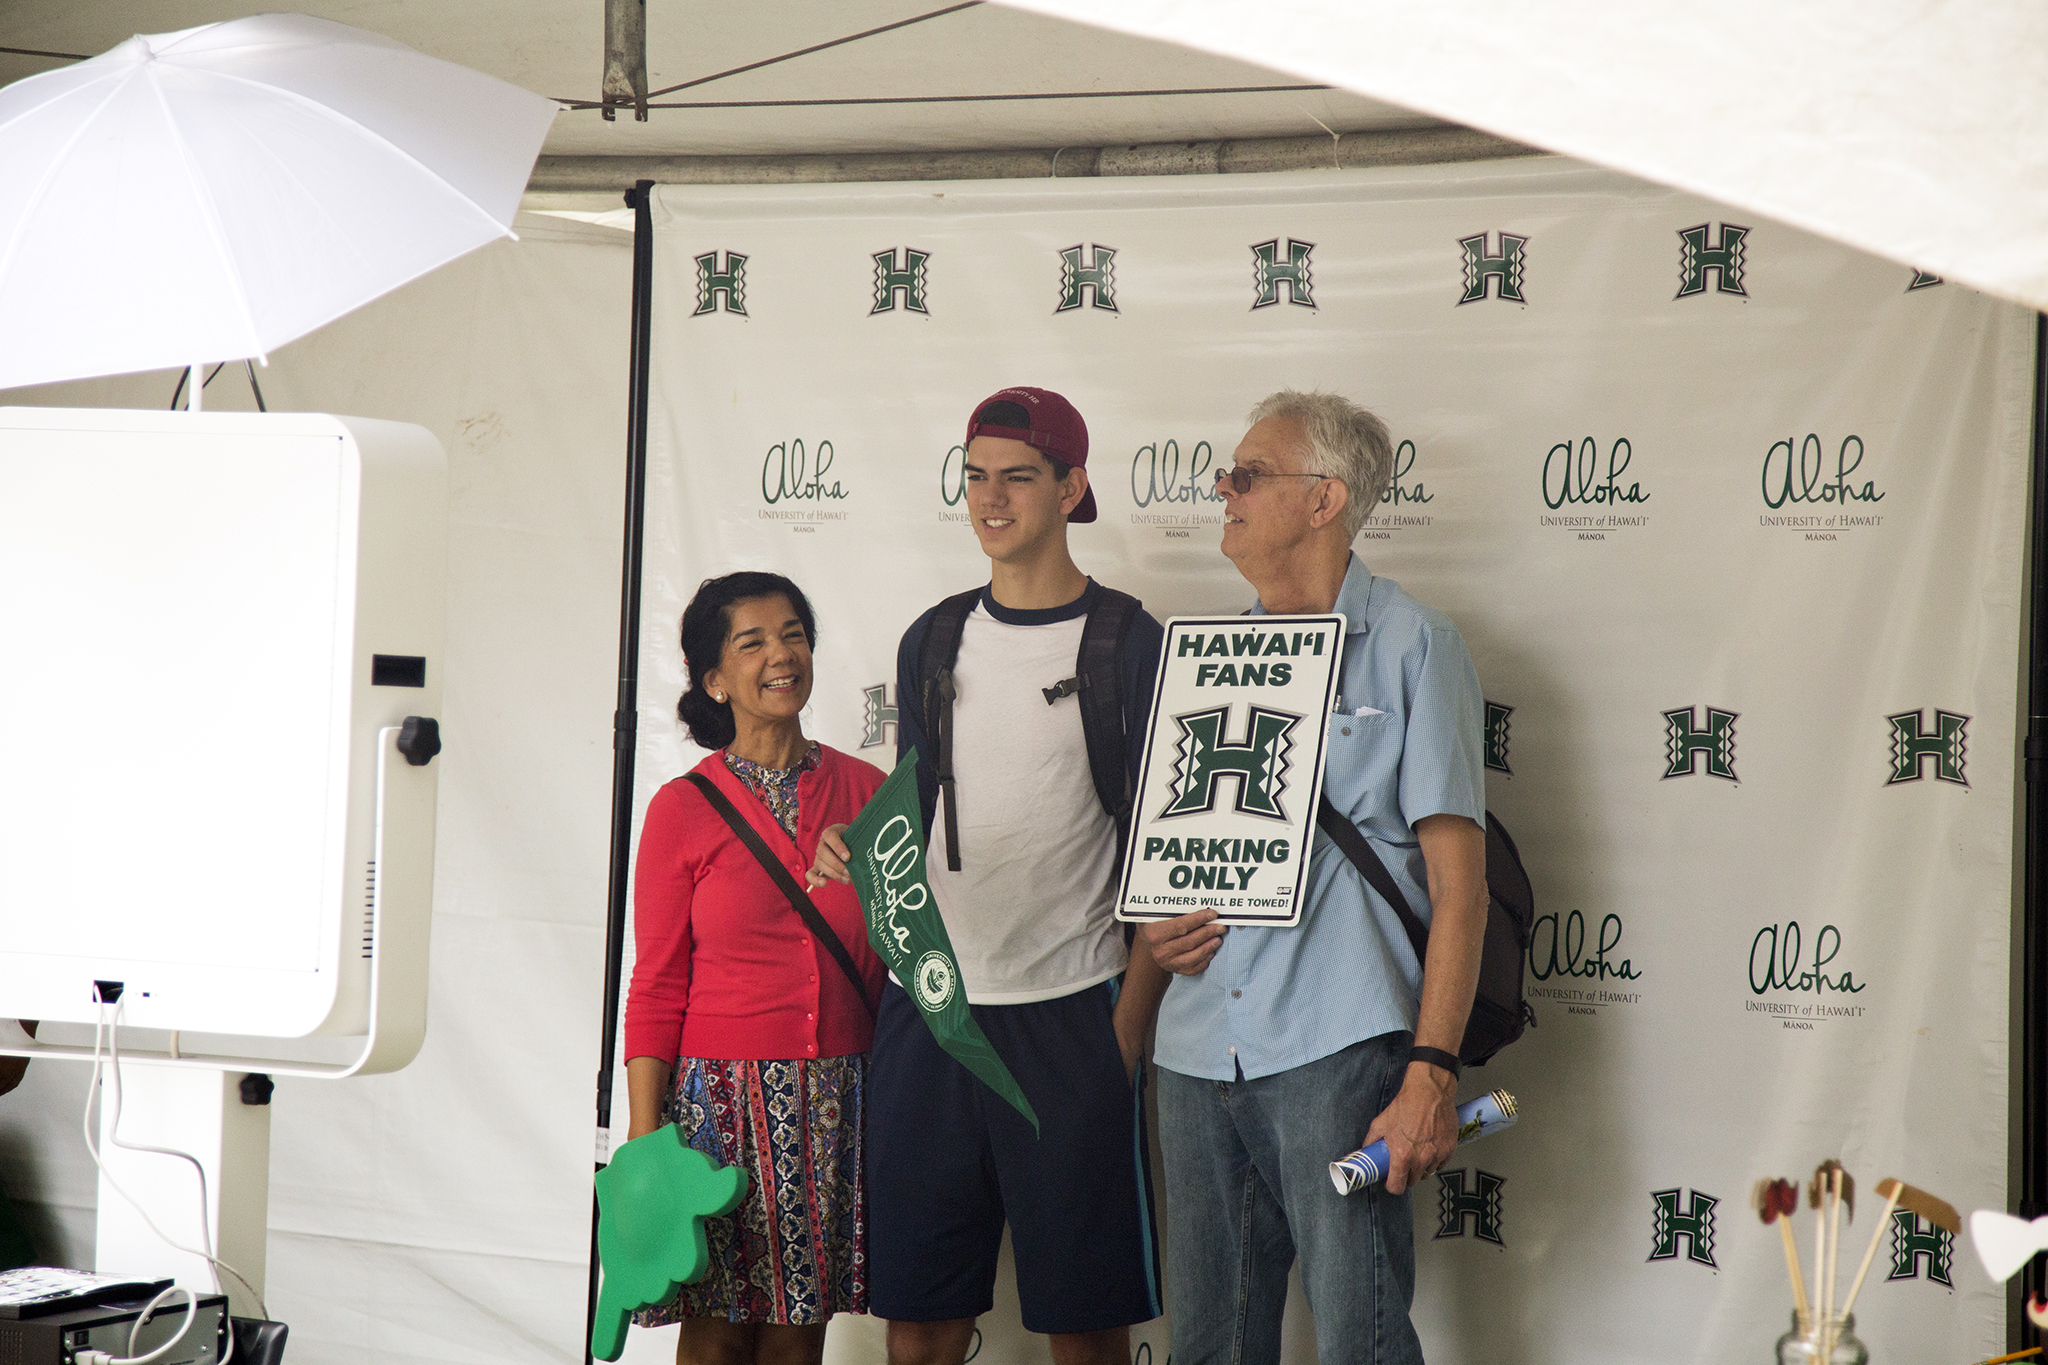 student with family at an event photo booth